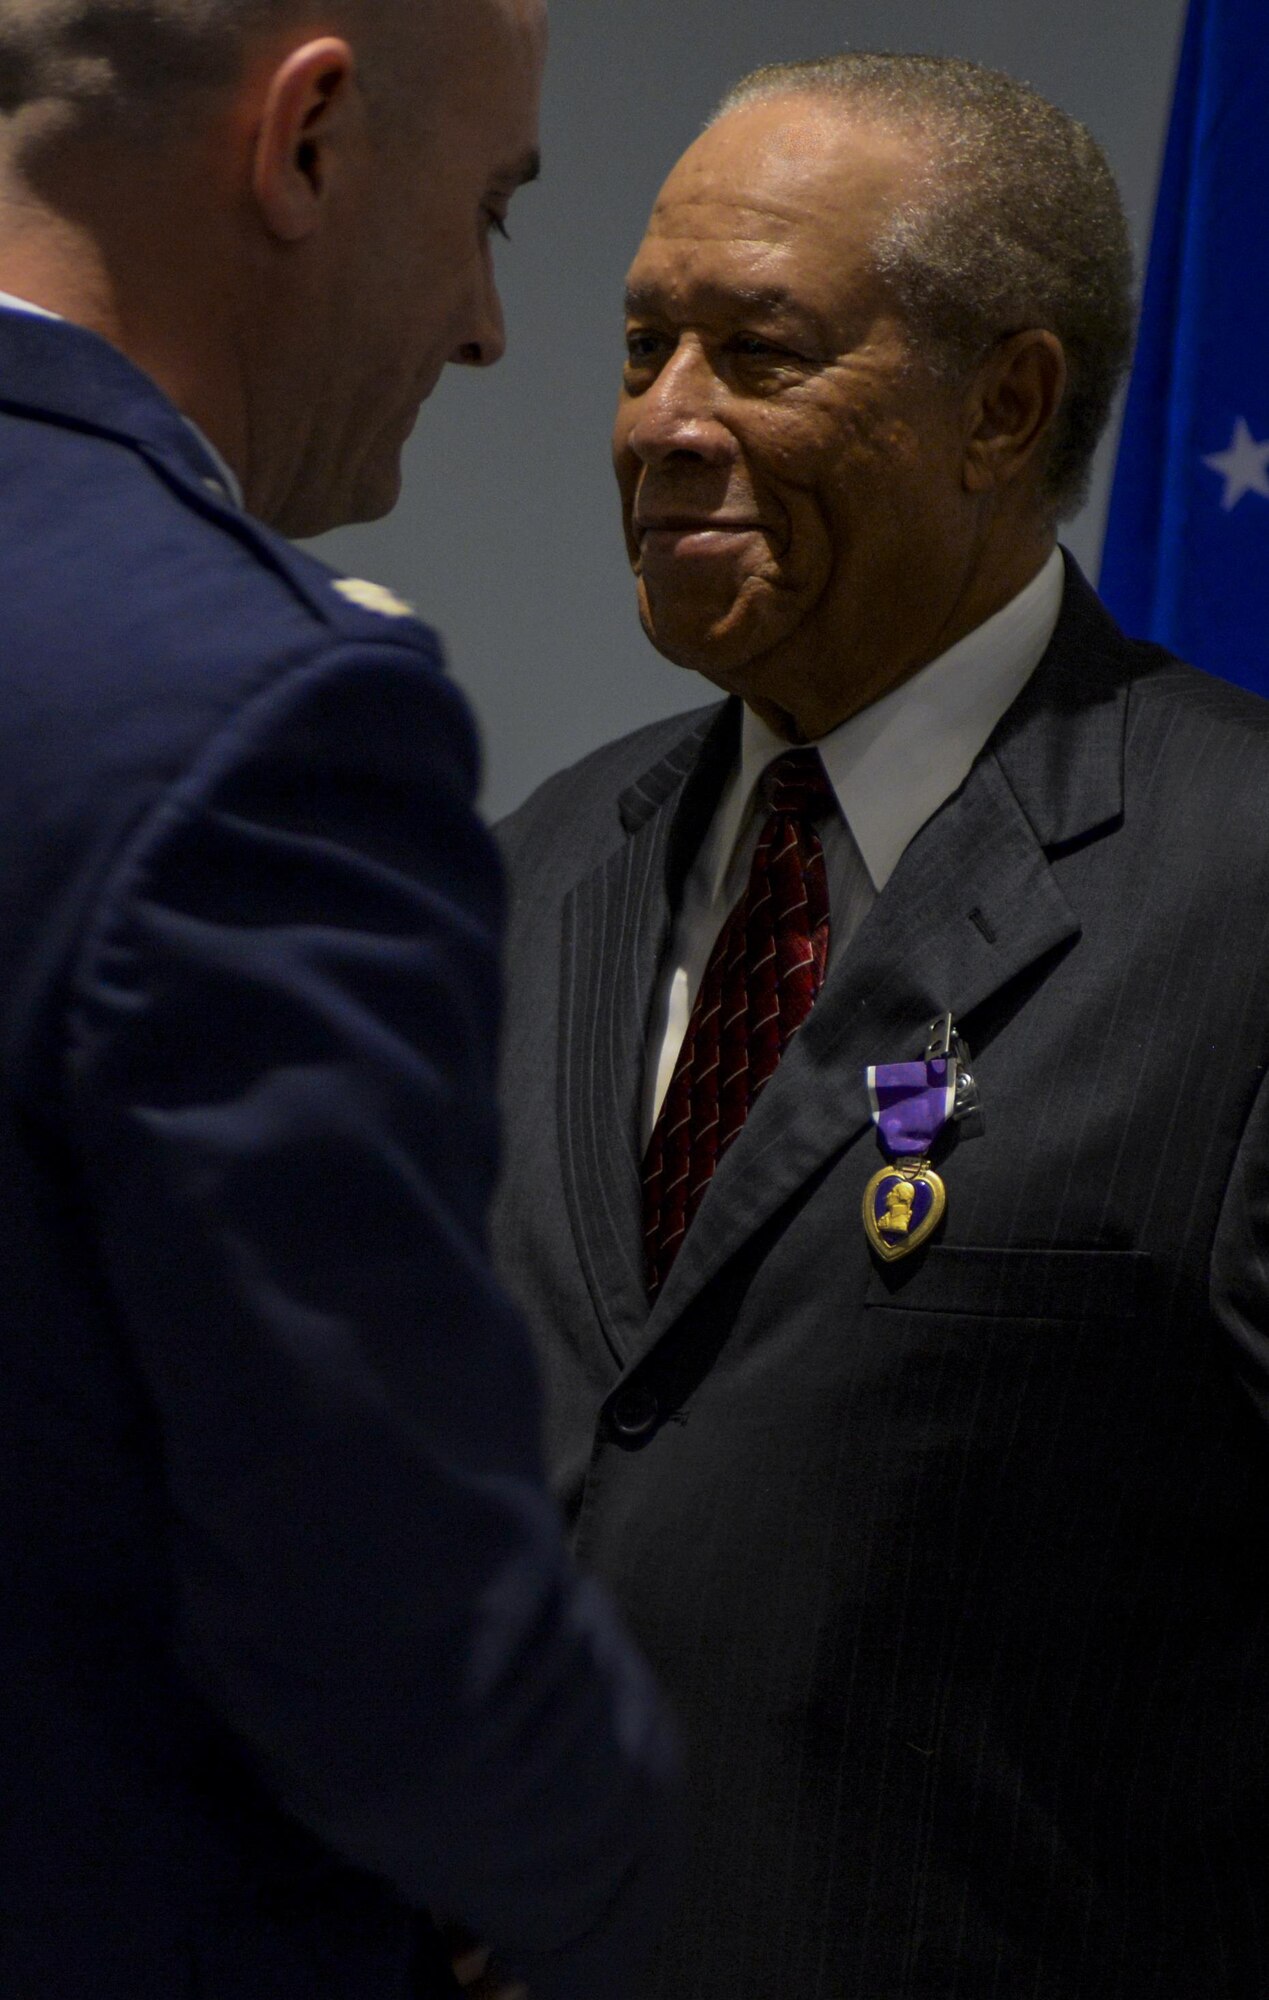 Retired Airman 1st Class Julius Farrar was awarded the Purple Heart by Lt. Col. Kyle Kloeckner at Nellis Air Force Base, Nev., April 28, 2016. Farrar served in the mountains keeping a transmitter working 24 hours a day, seven days a week during the Korean War. (U.S. Air Force photo by Airman 1st Class Kevin Tanenbaum)